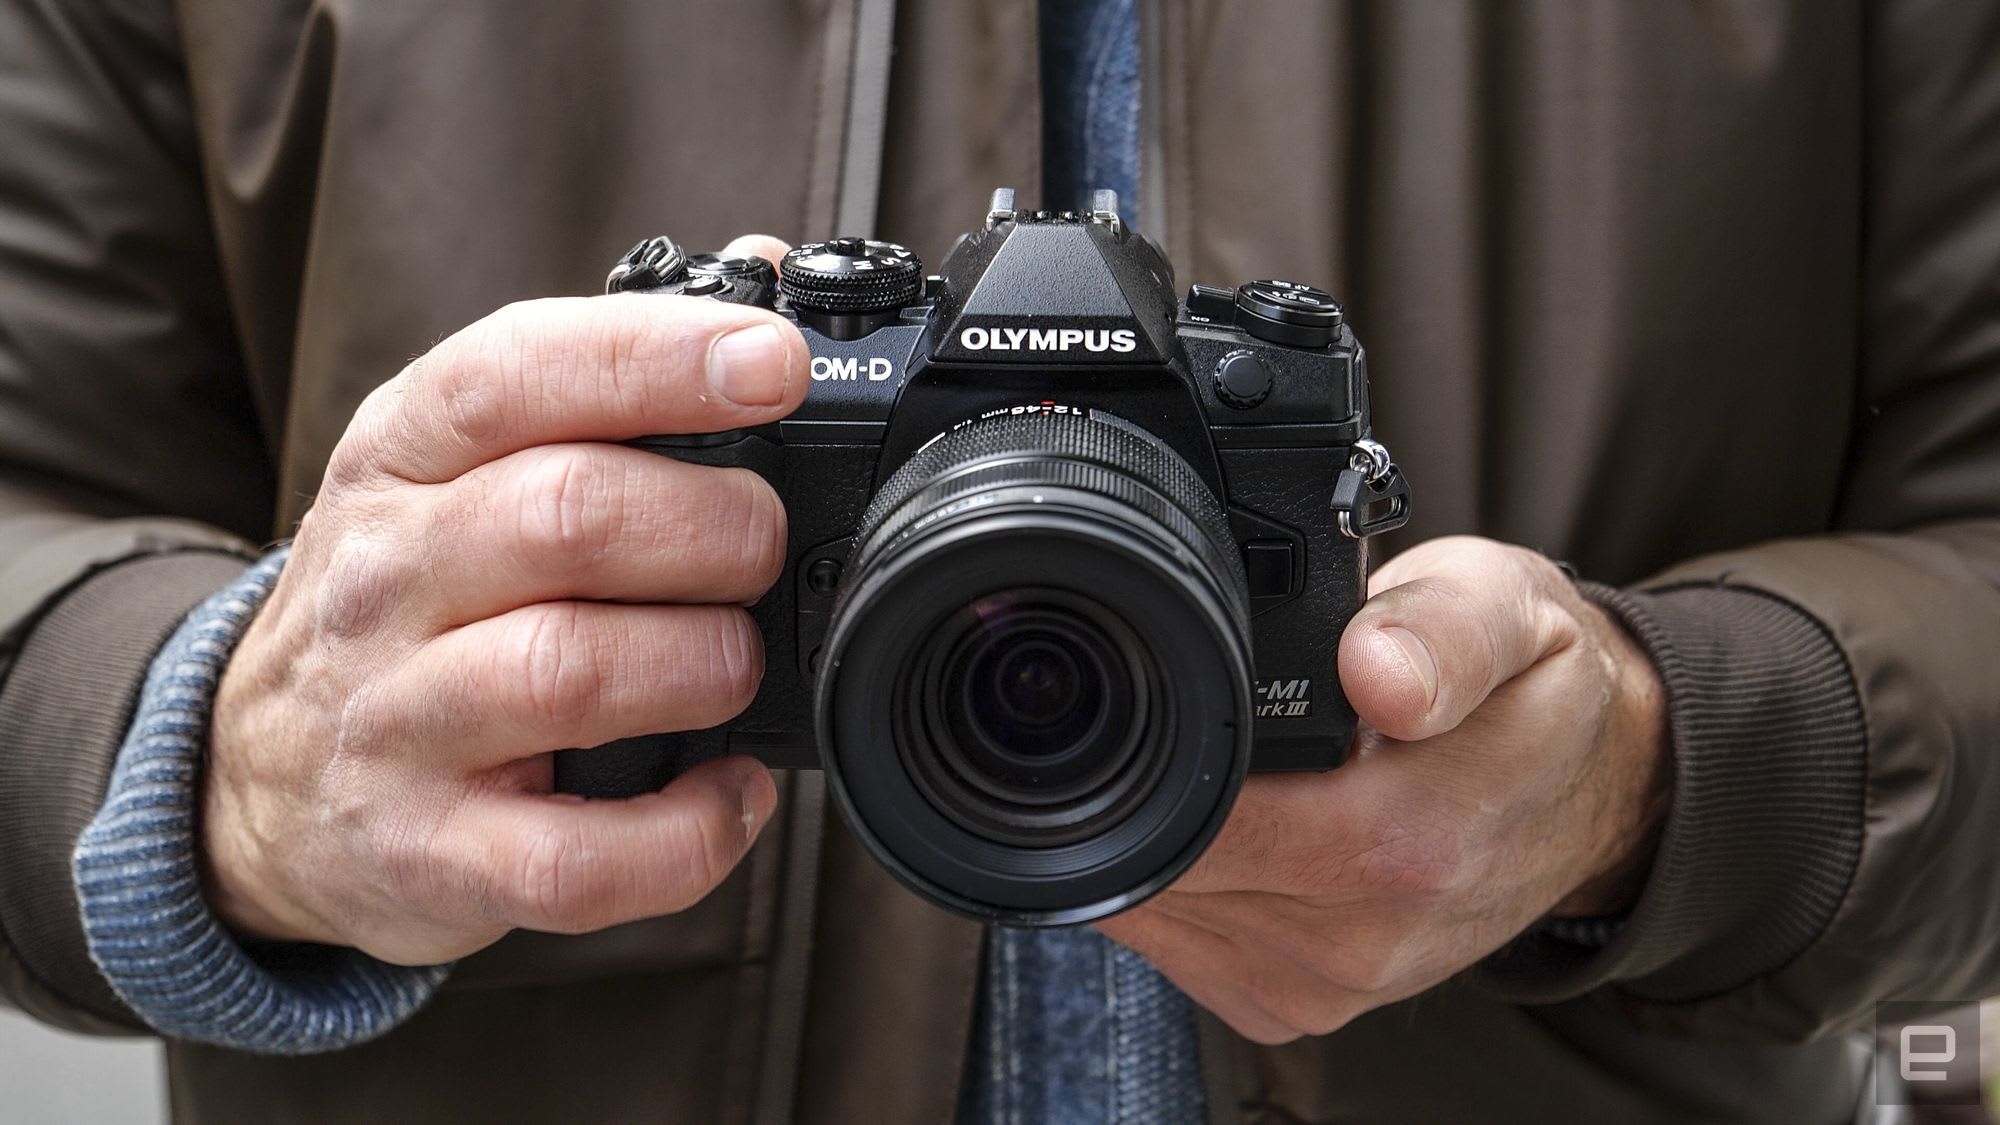 Olympus E-M1 III review: Fast, but way behind flagship camera rivals